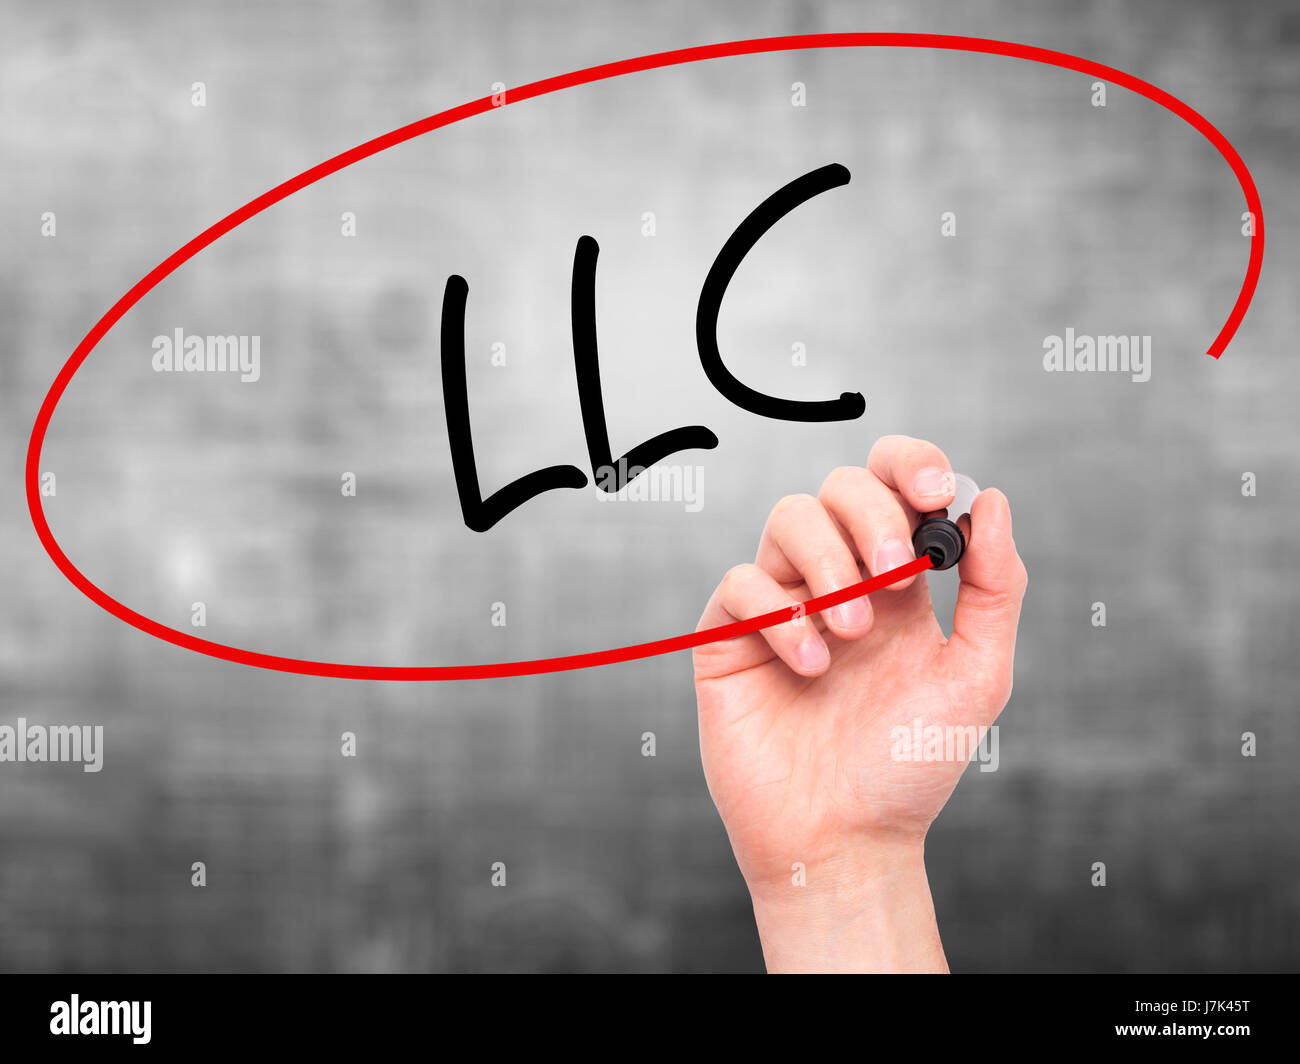 Man Hand writing LLC (Limited Liability Company) with black marker